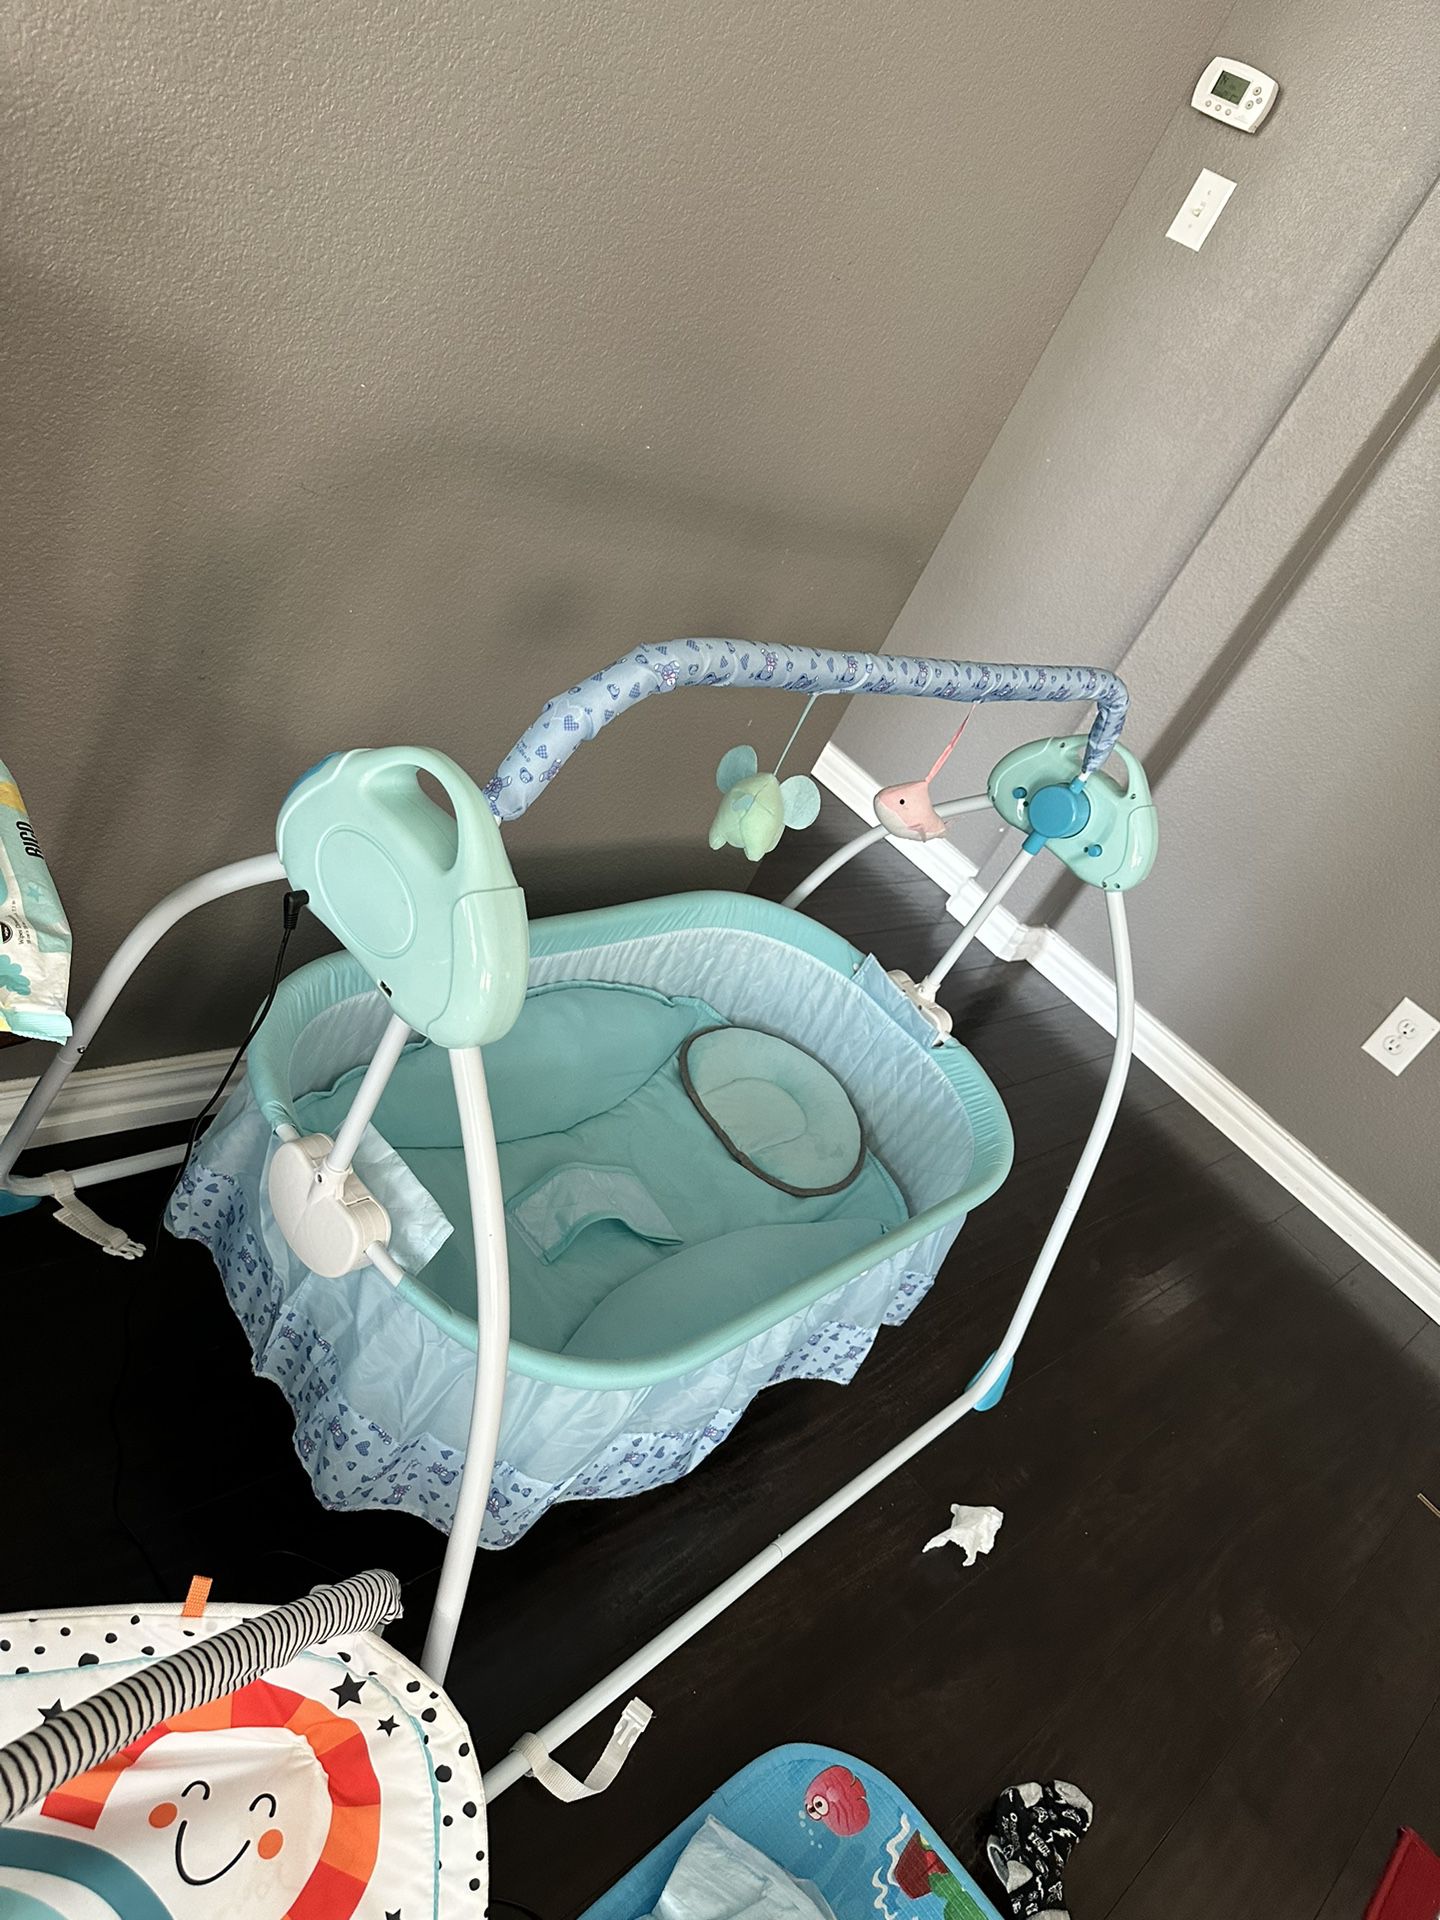 Electric & Automatic Swing For New Born - $75